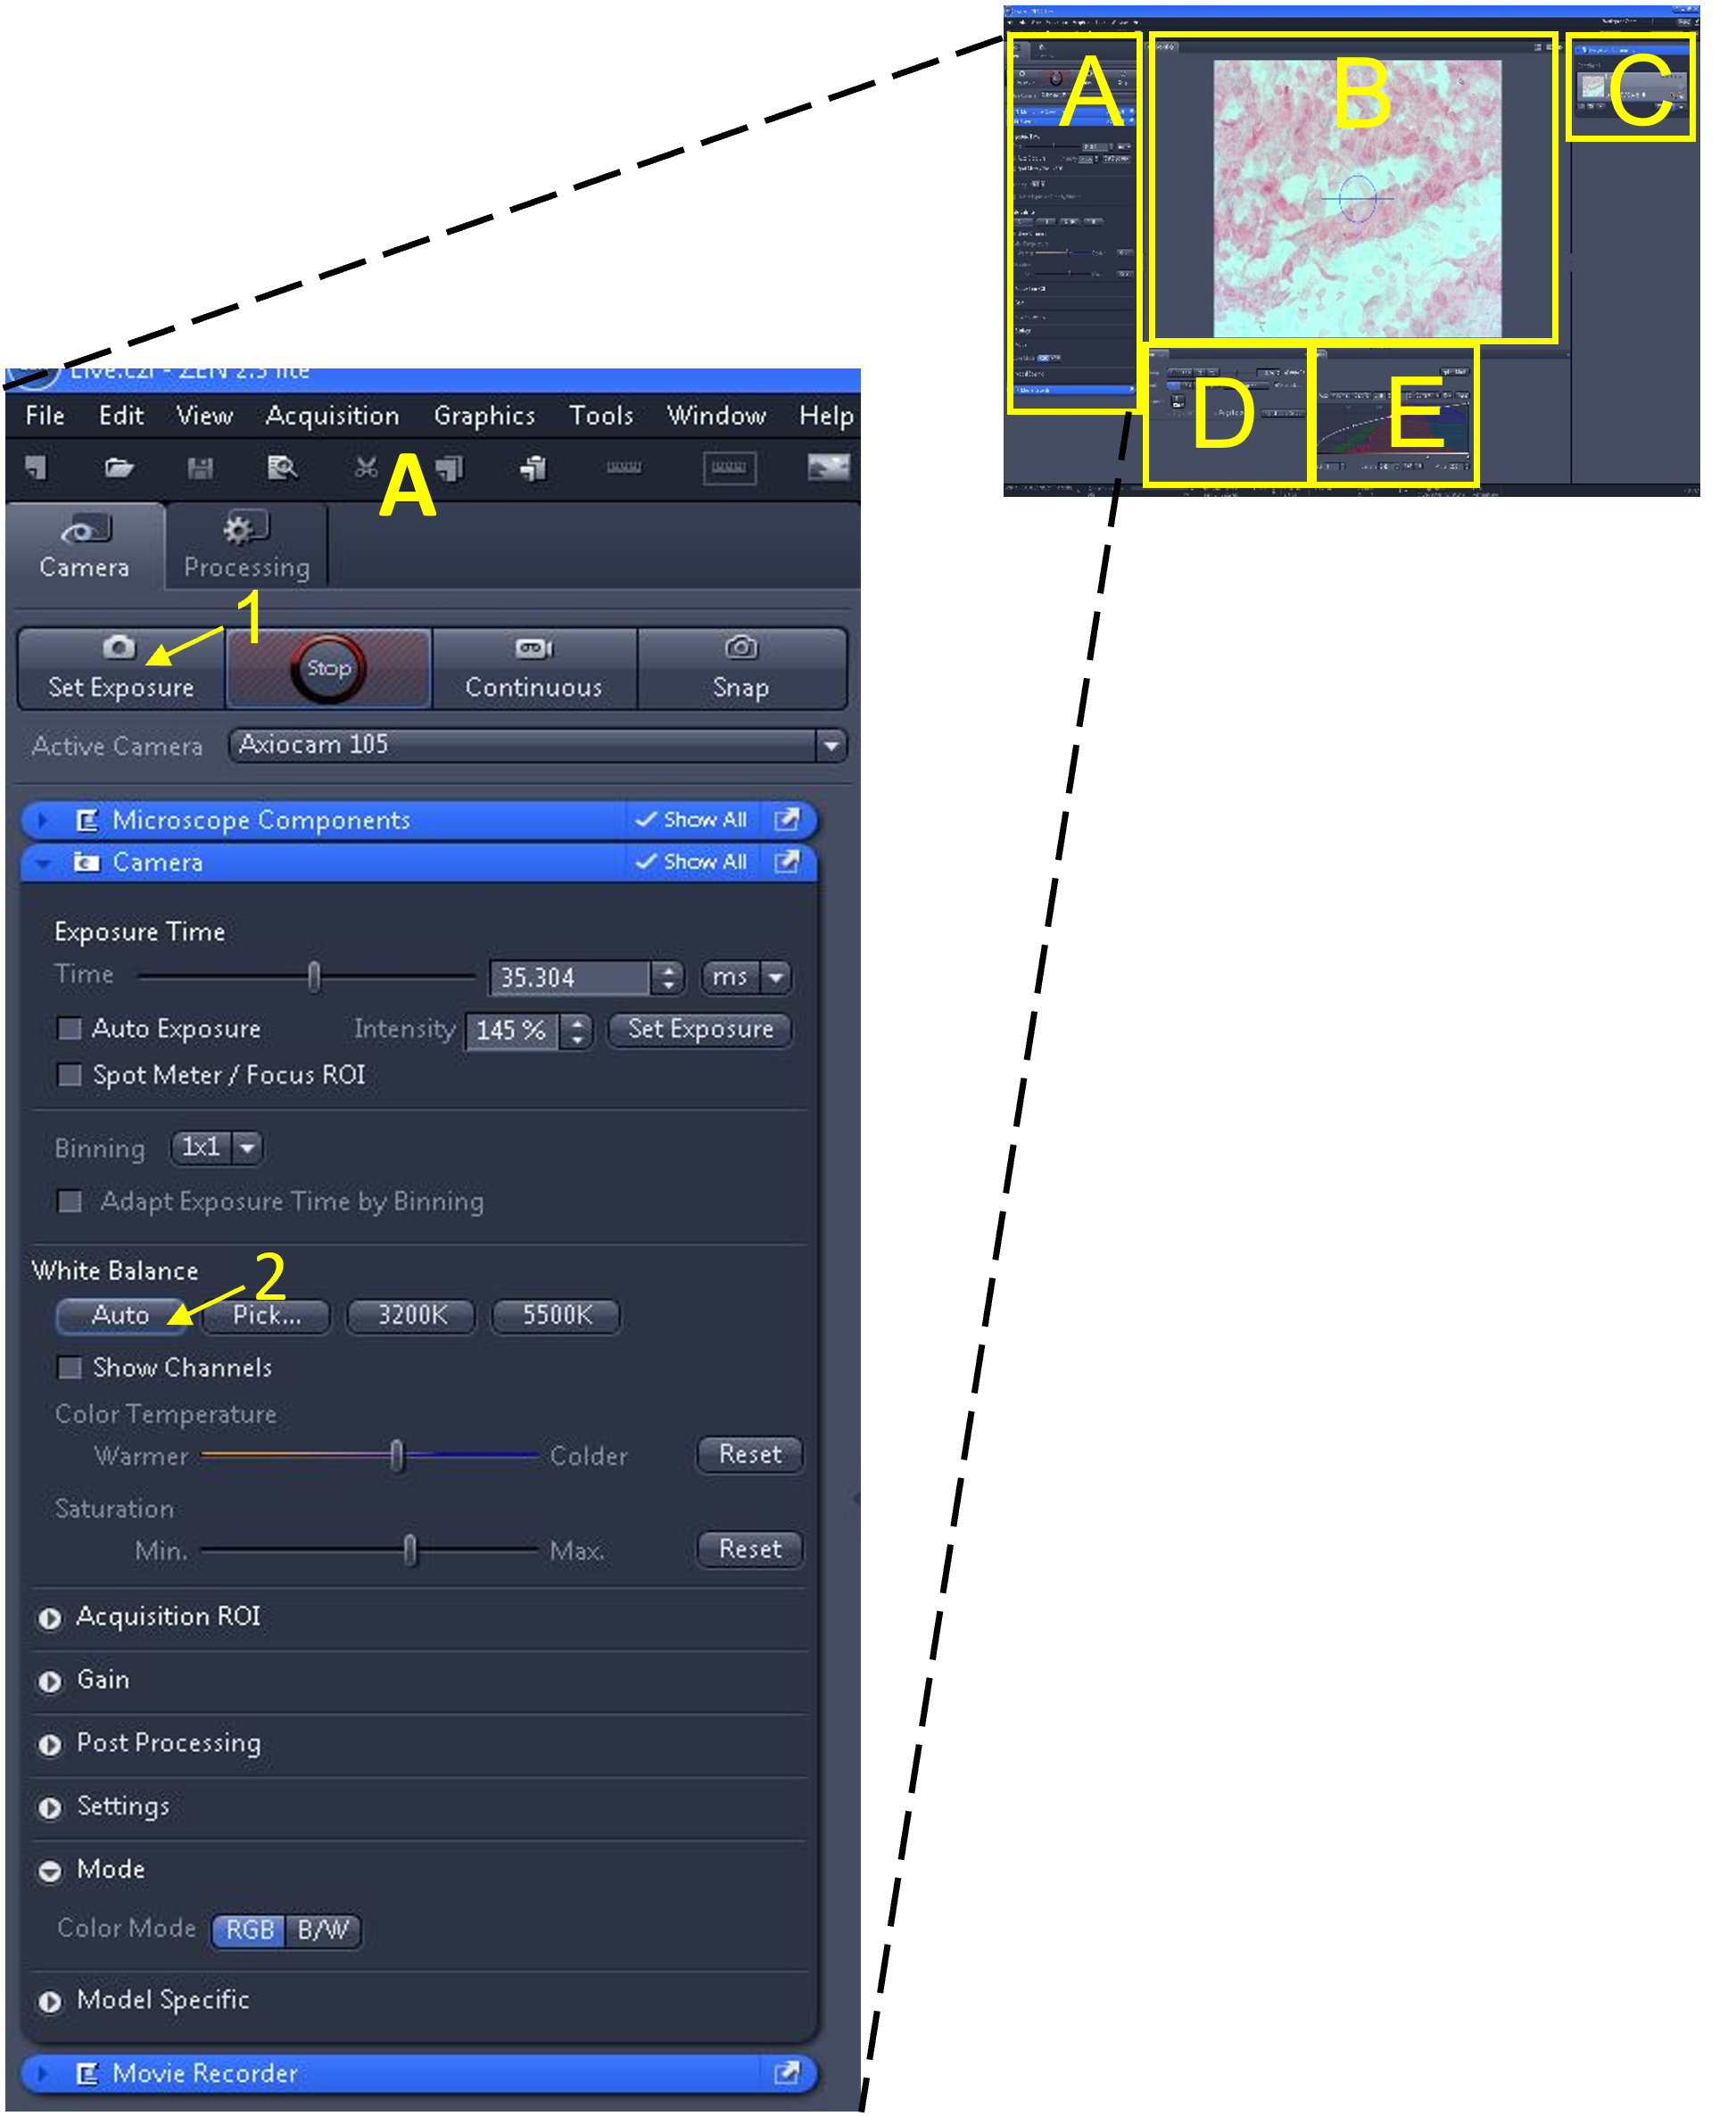 An image of the main tool area indicating the set exposure button and the auto white balance button.